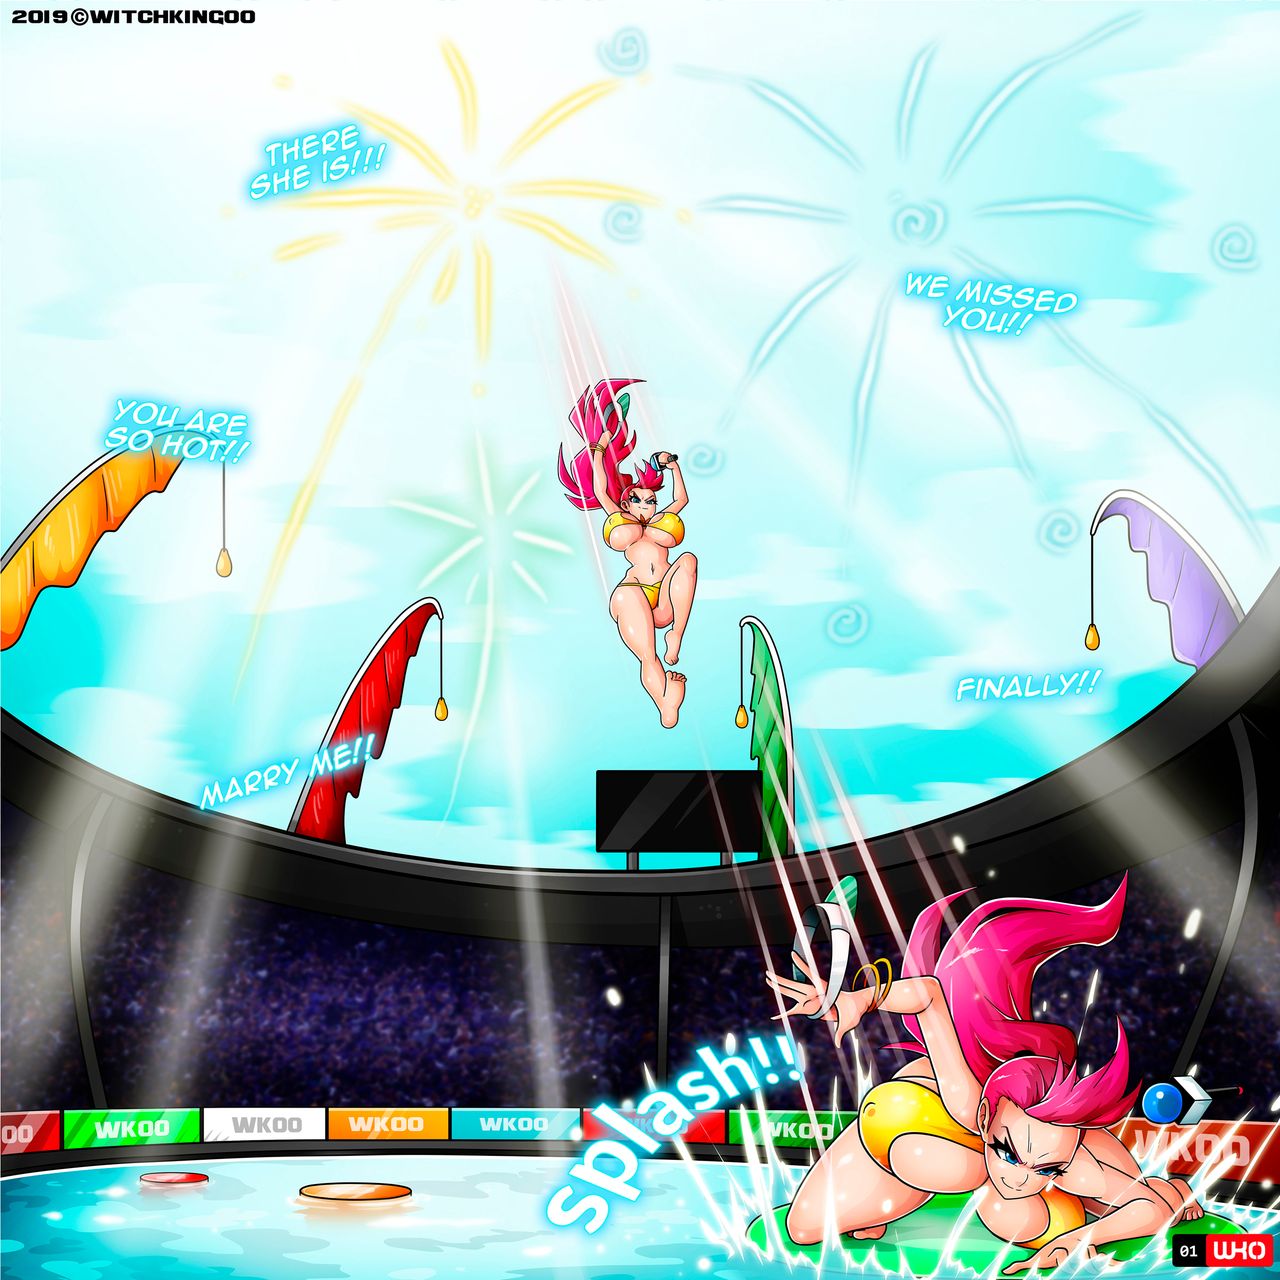 Sumer Pool Party 2 Part 1 Witchking00 04